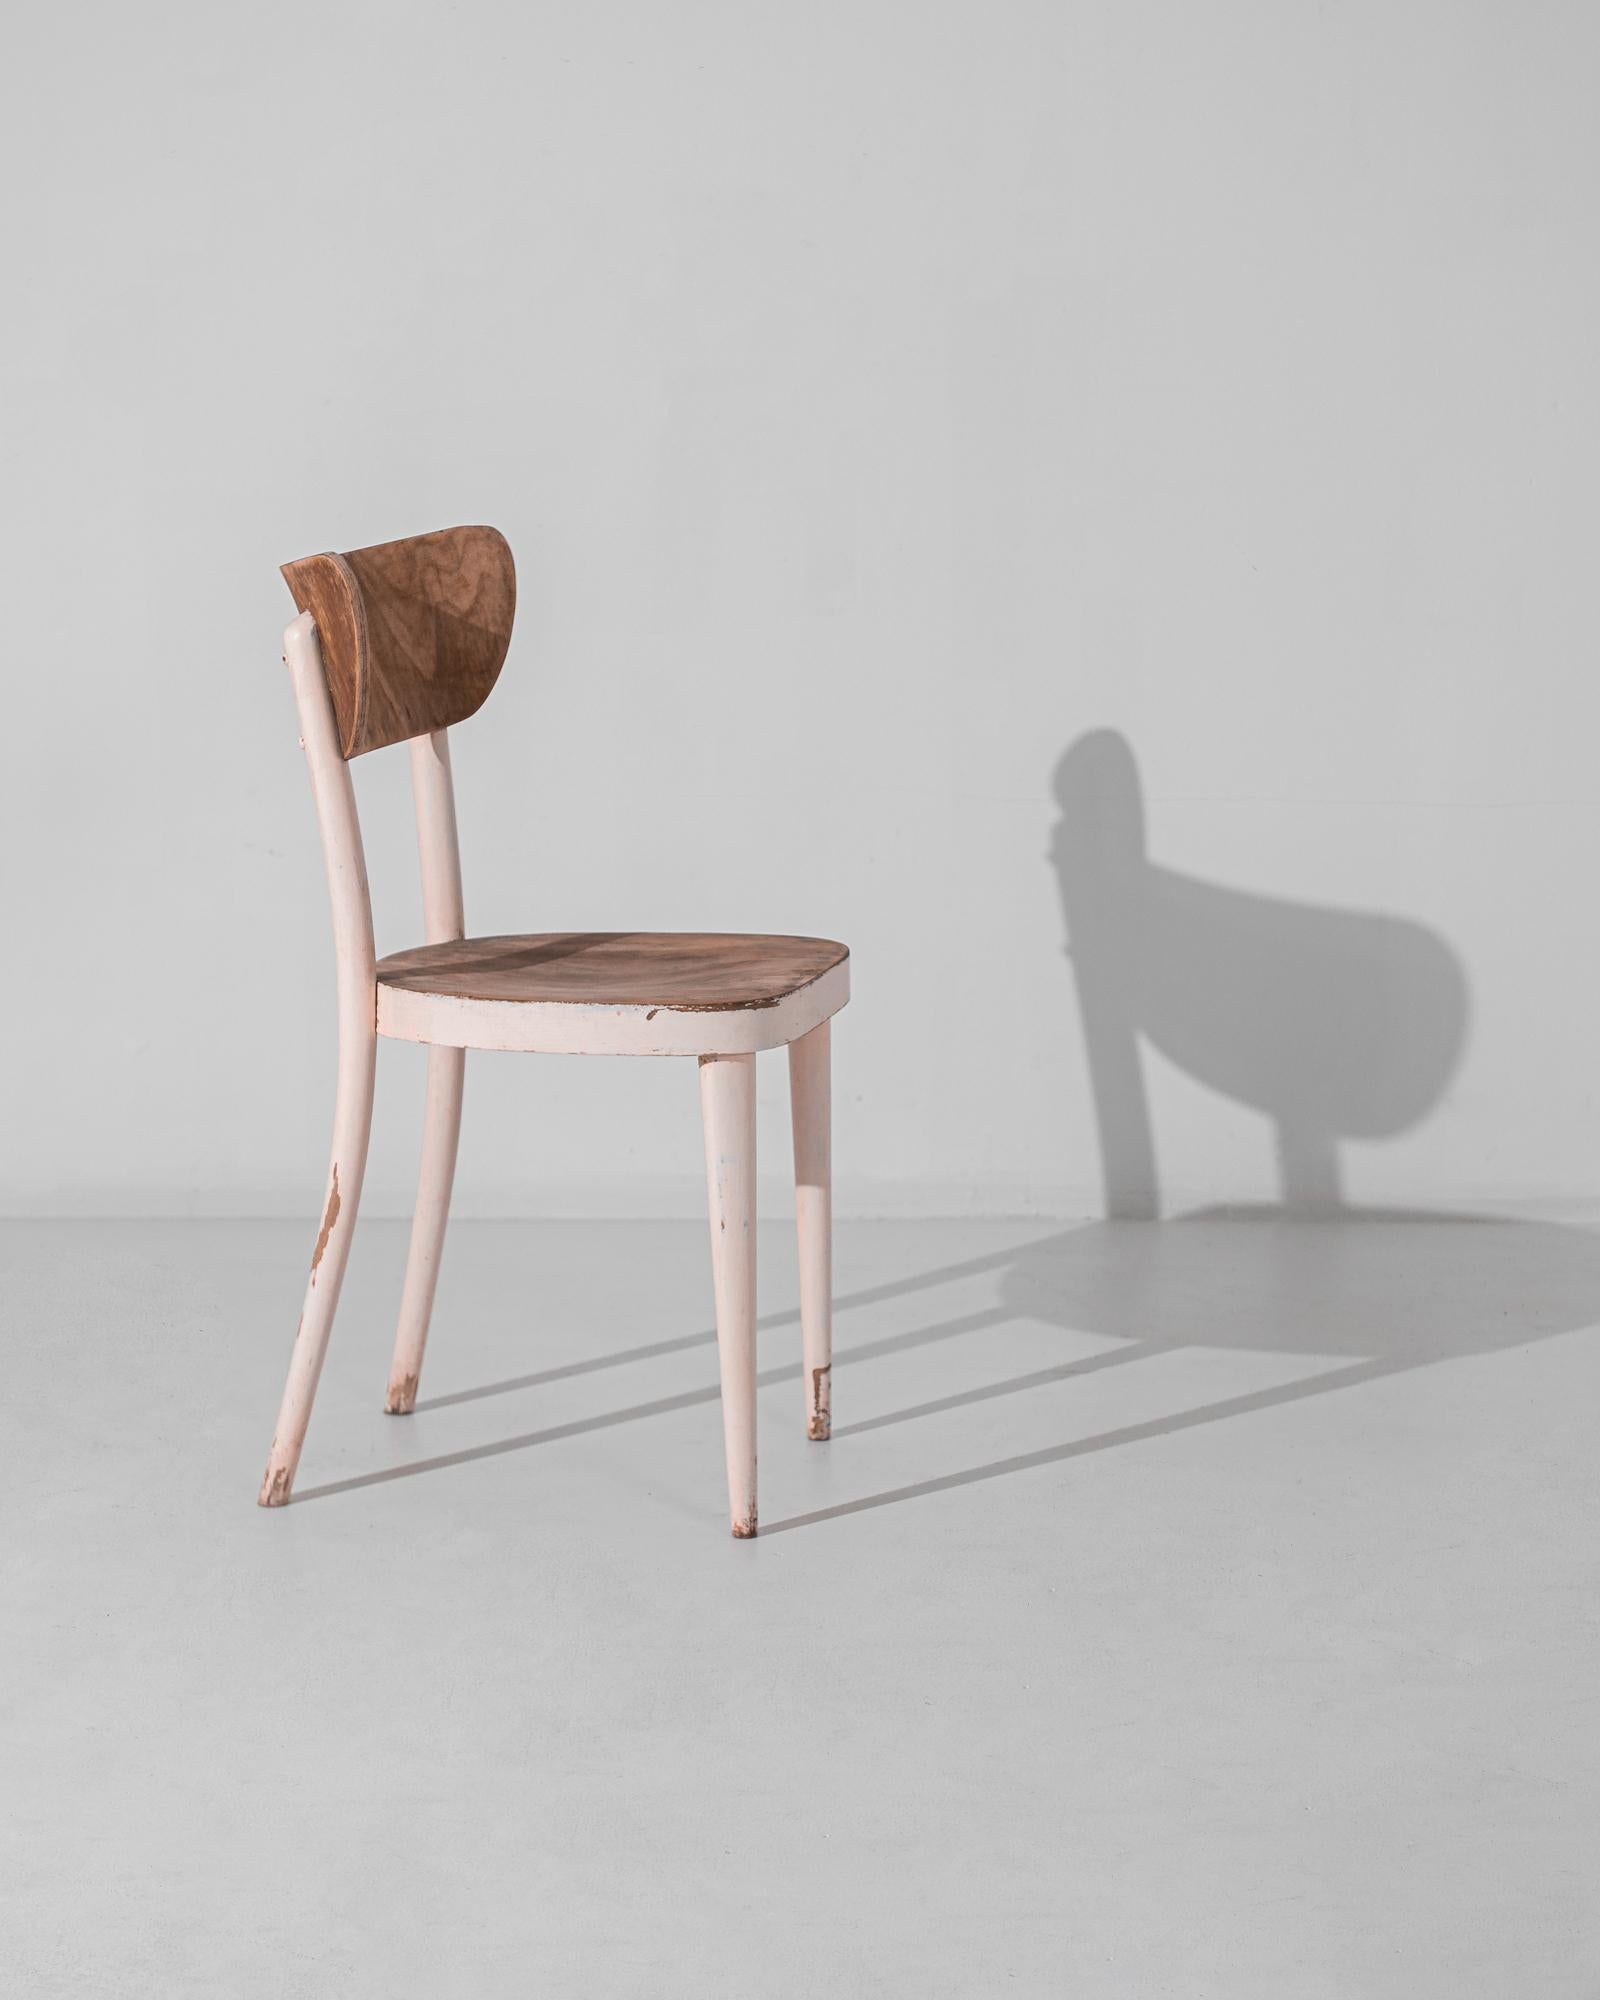 From the mid-century era of 1950s Czechia emerges this remarkable wooden chair, a testament to the ingenuity and craftsmanship of the time. Crafted with precision and care, this chair embodies the simplicity and functionality synonymous with